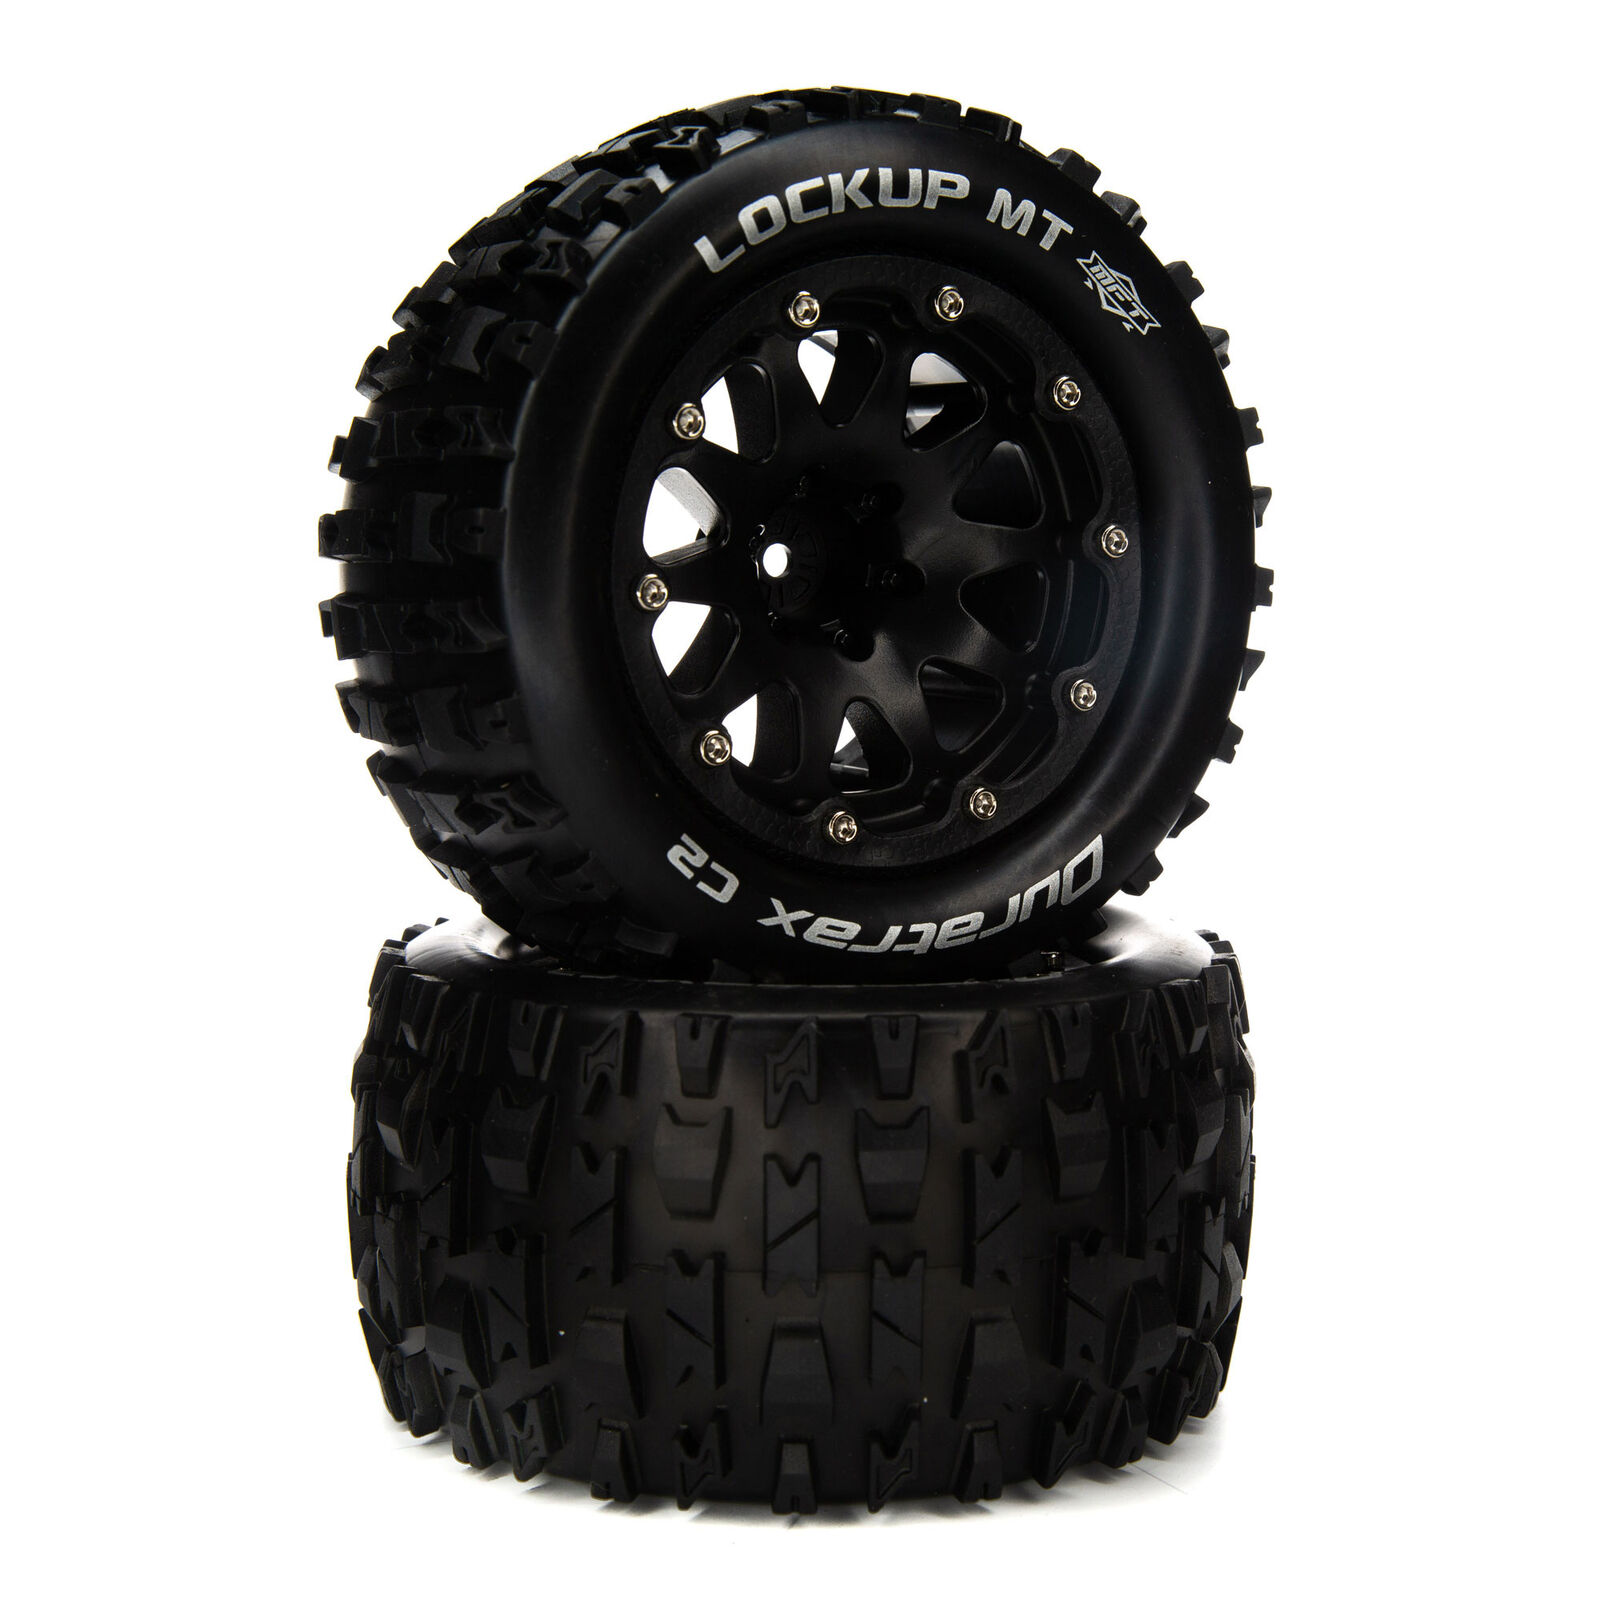 Duratrax Lockup MT Belted 2.8" Mounted Front/Rear Tires 14mm Black 2 DTXC5537